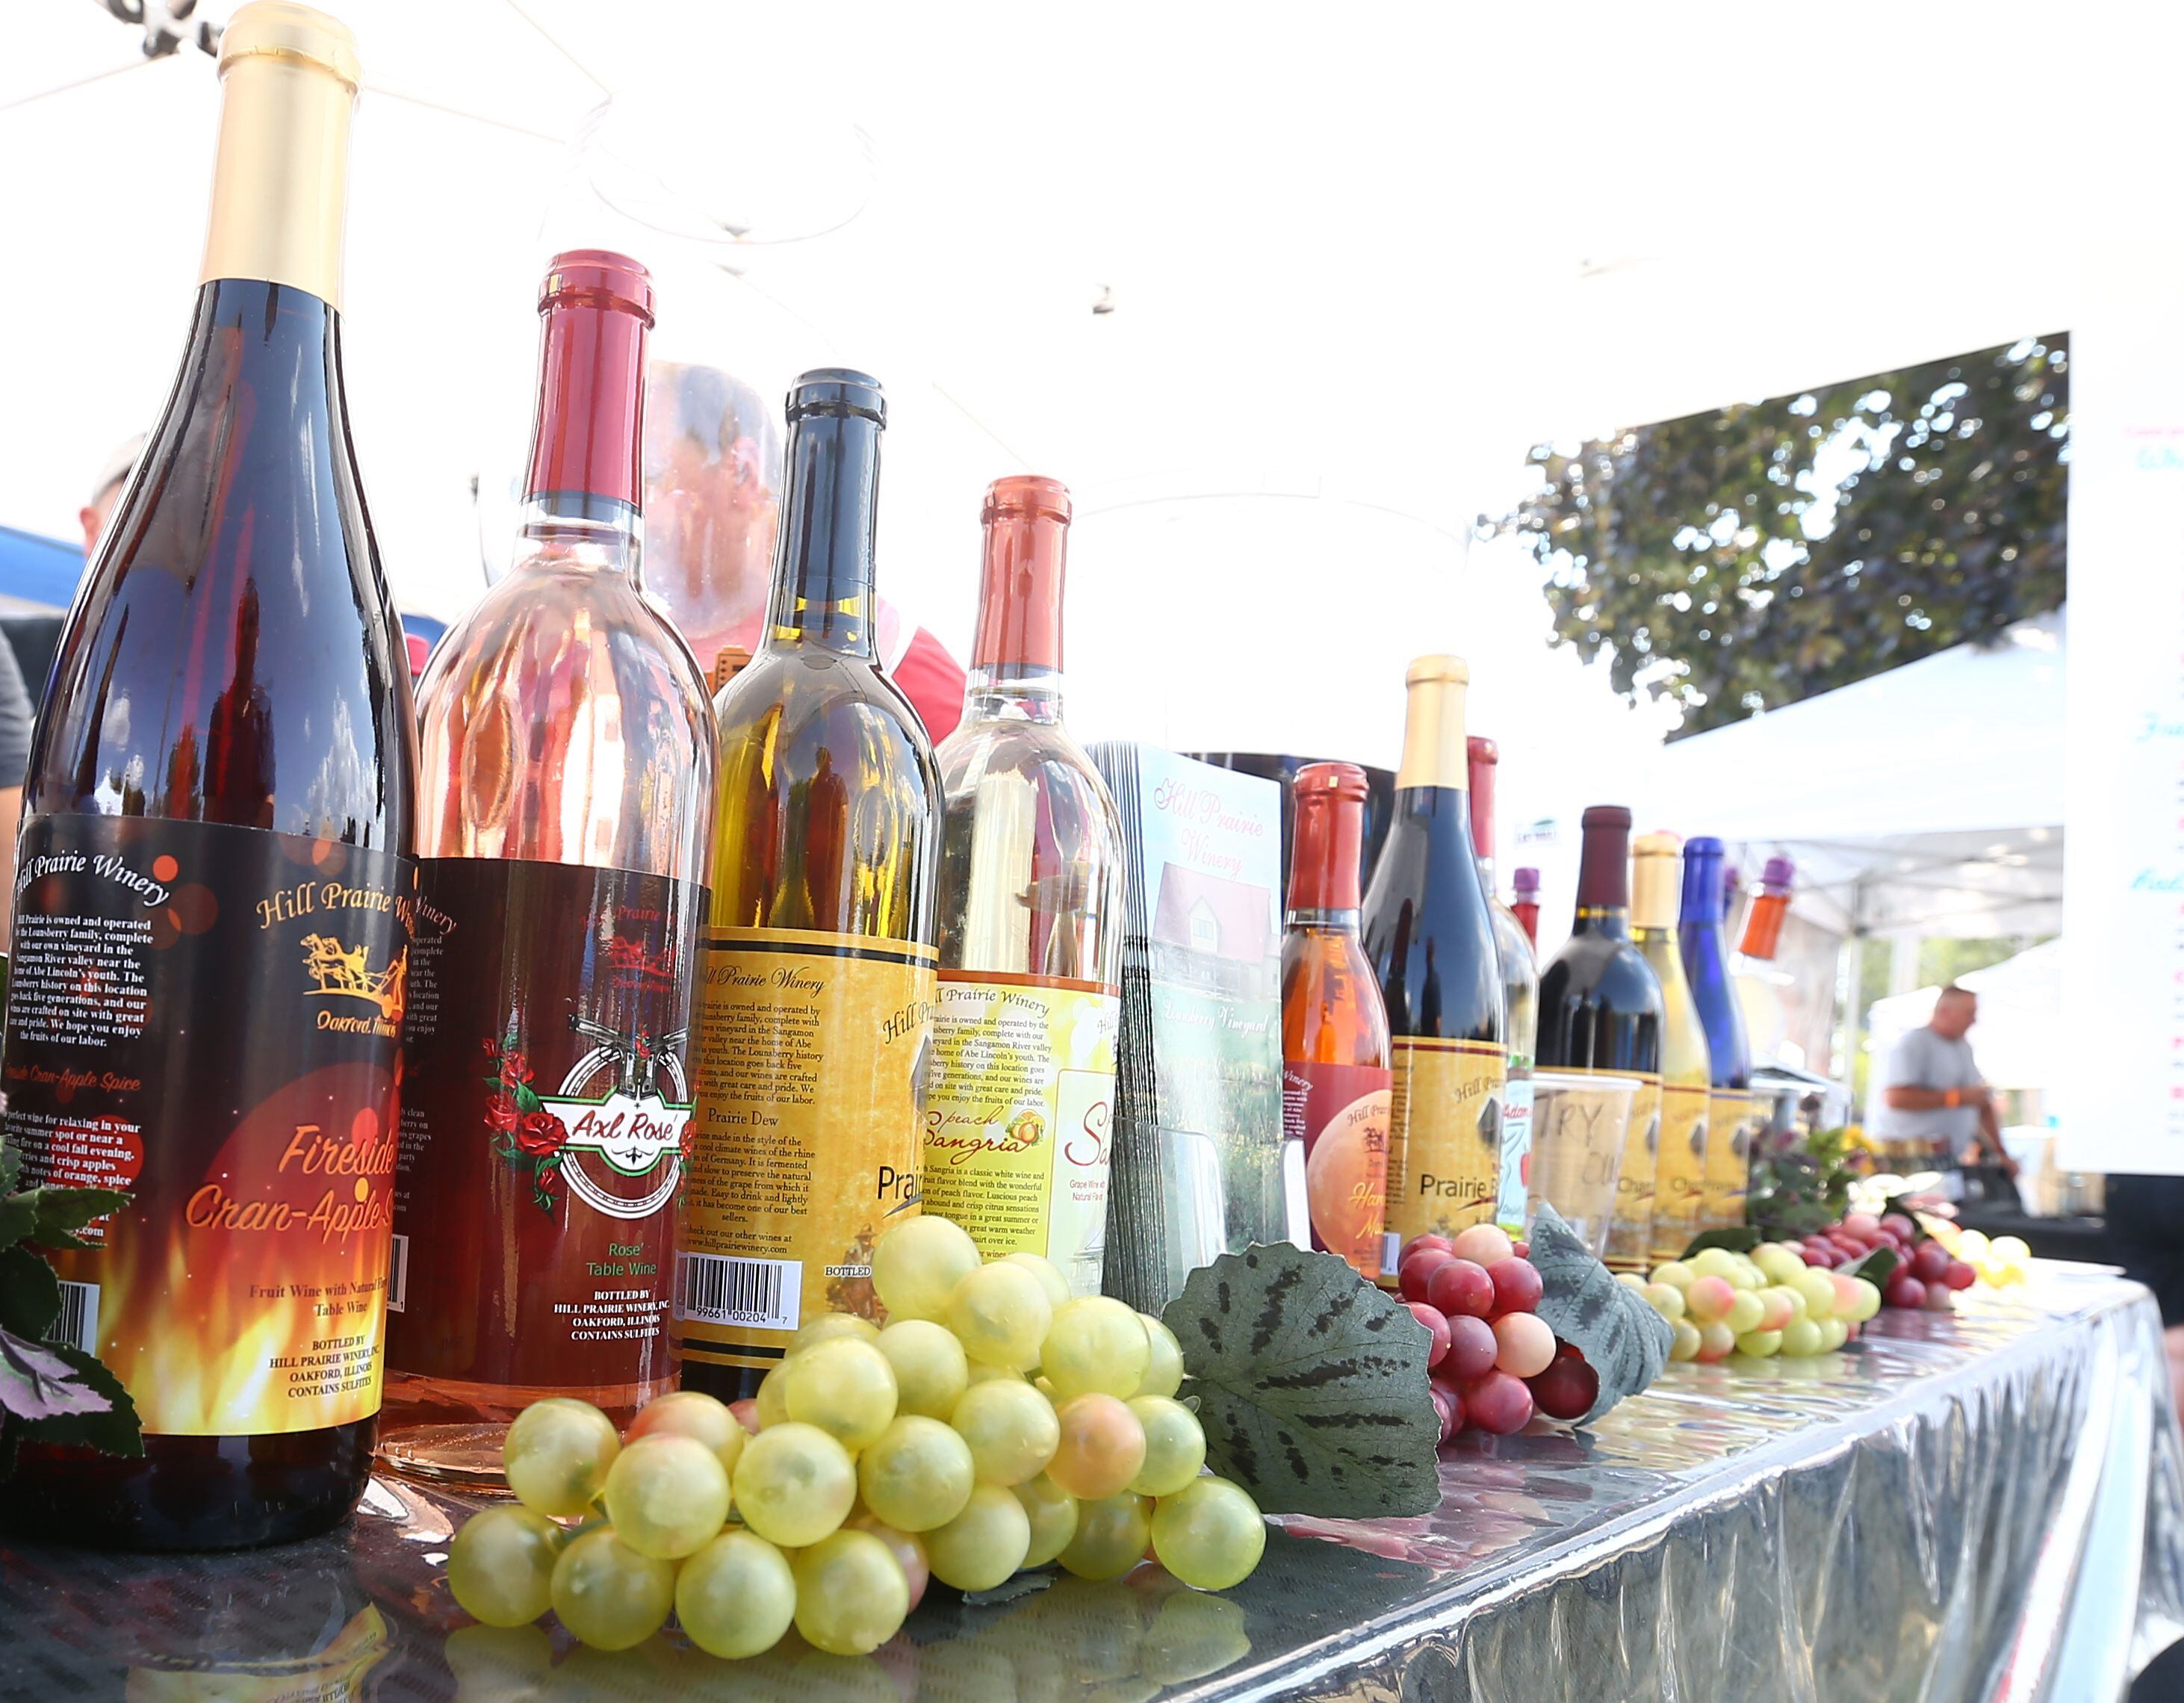 A display of wine bottles and grapes welcome visitors at the Illinois Vintage Wine Fest in Utica.